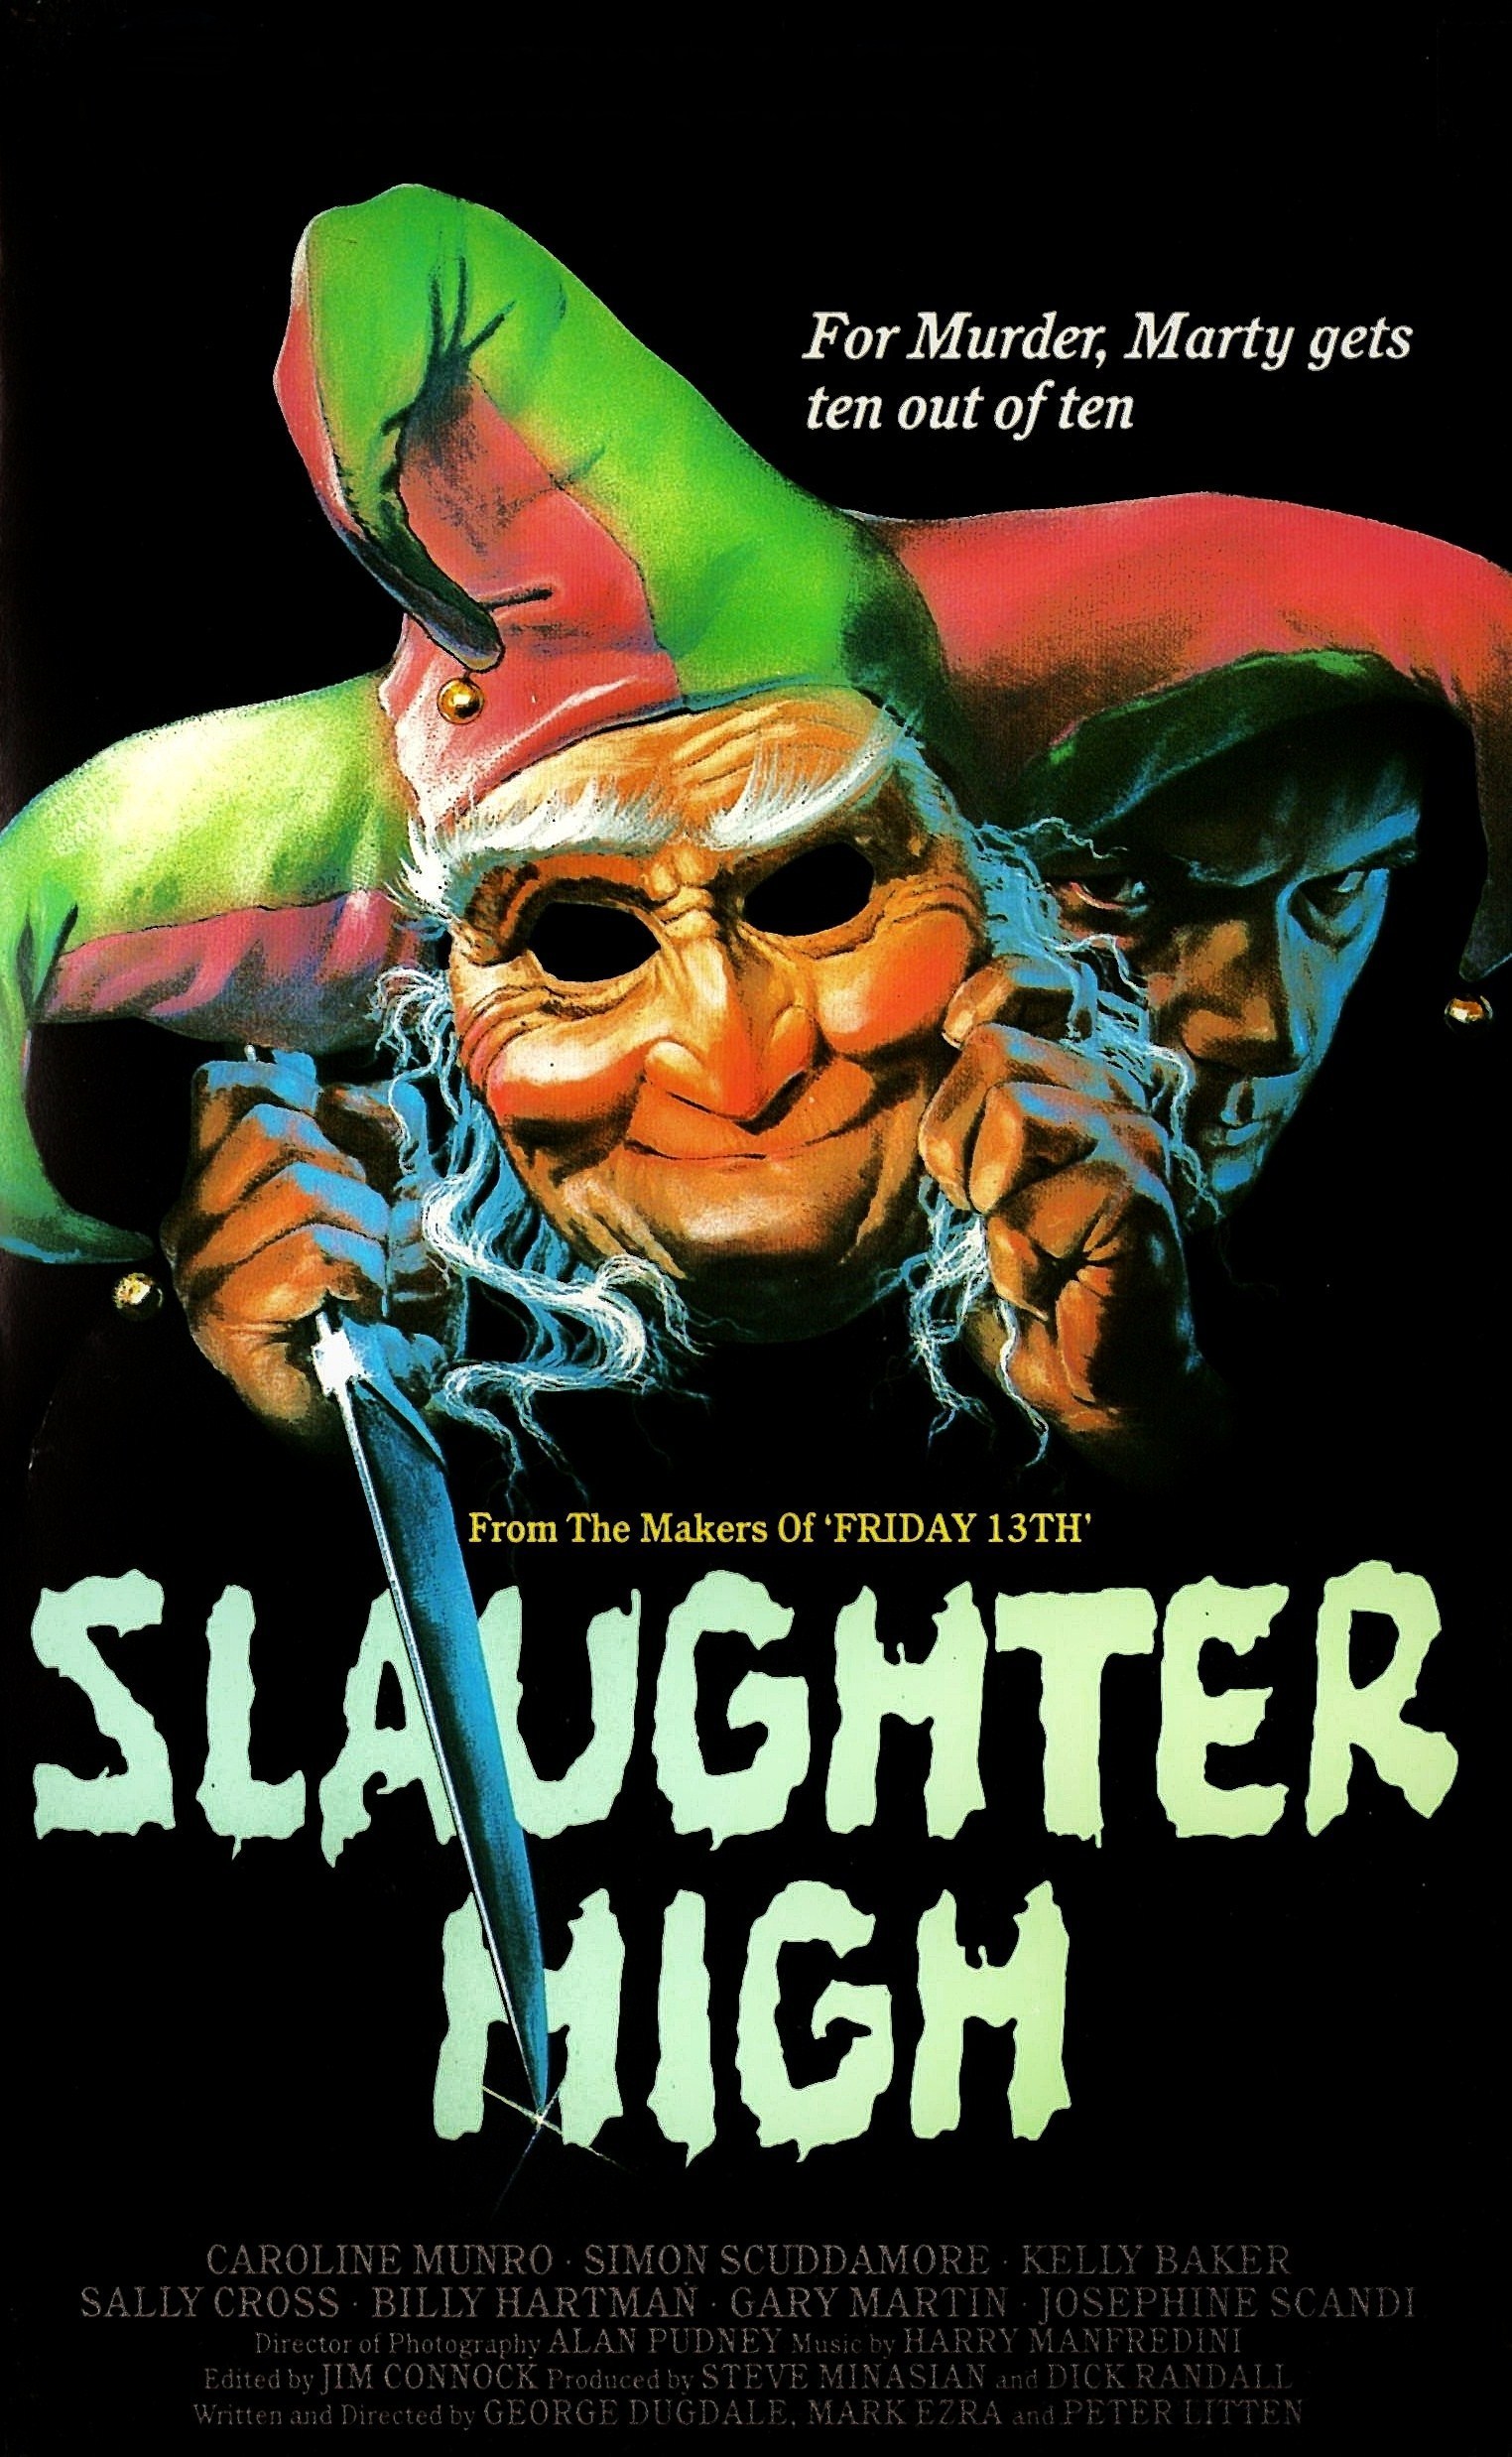 HALLOWEEN 2K16: A Review of “Slaughter High” (1986) – Caggiano's Corner